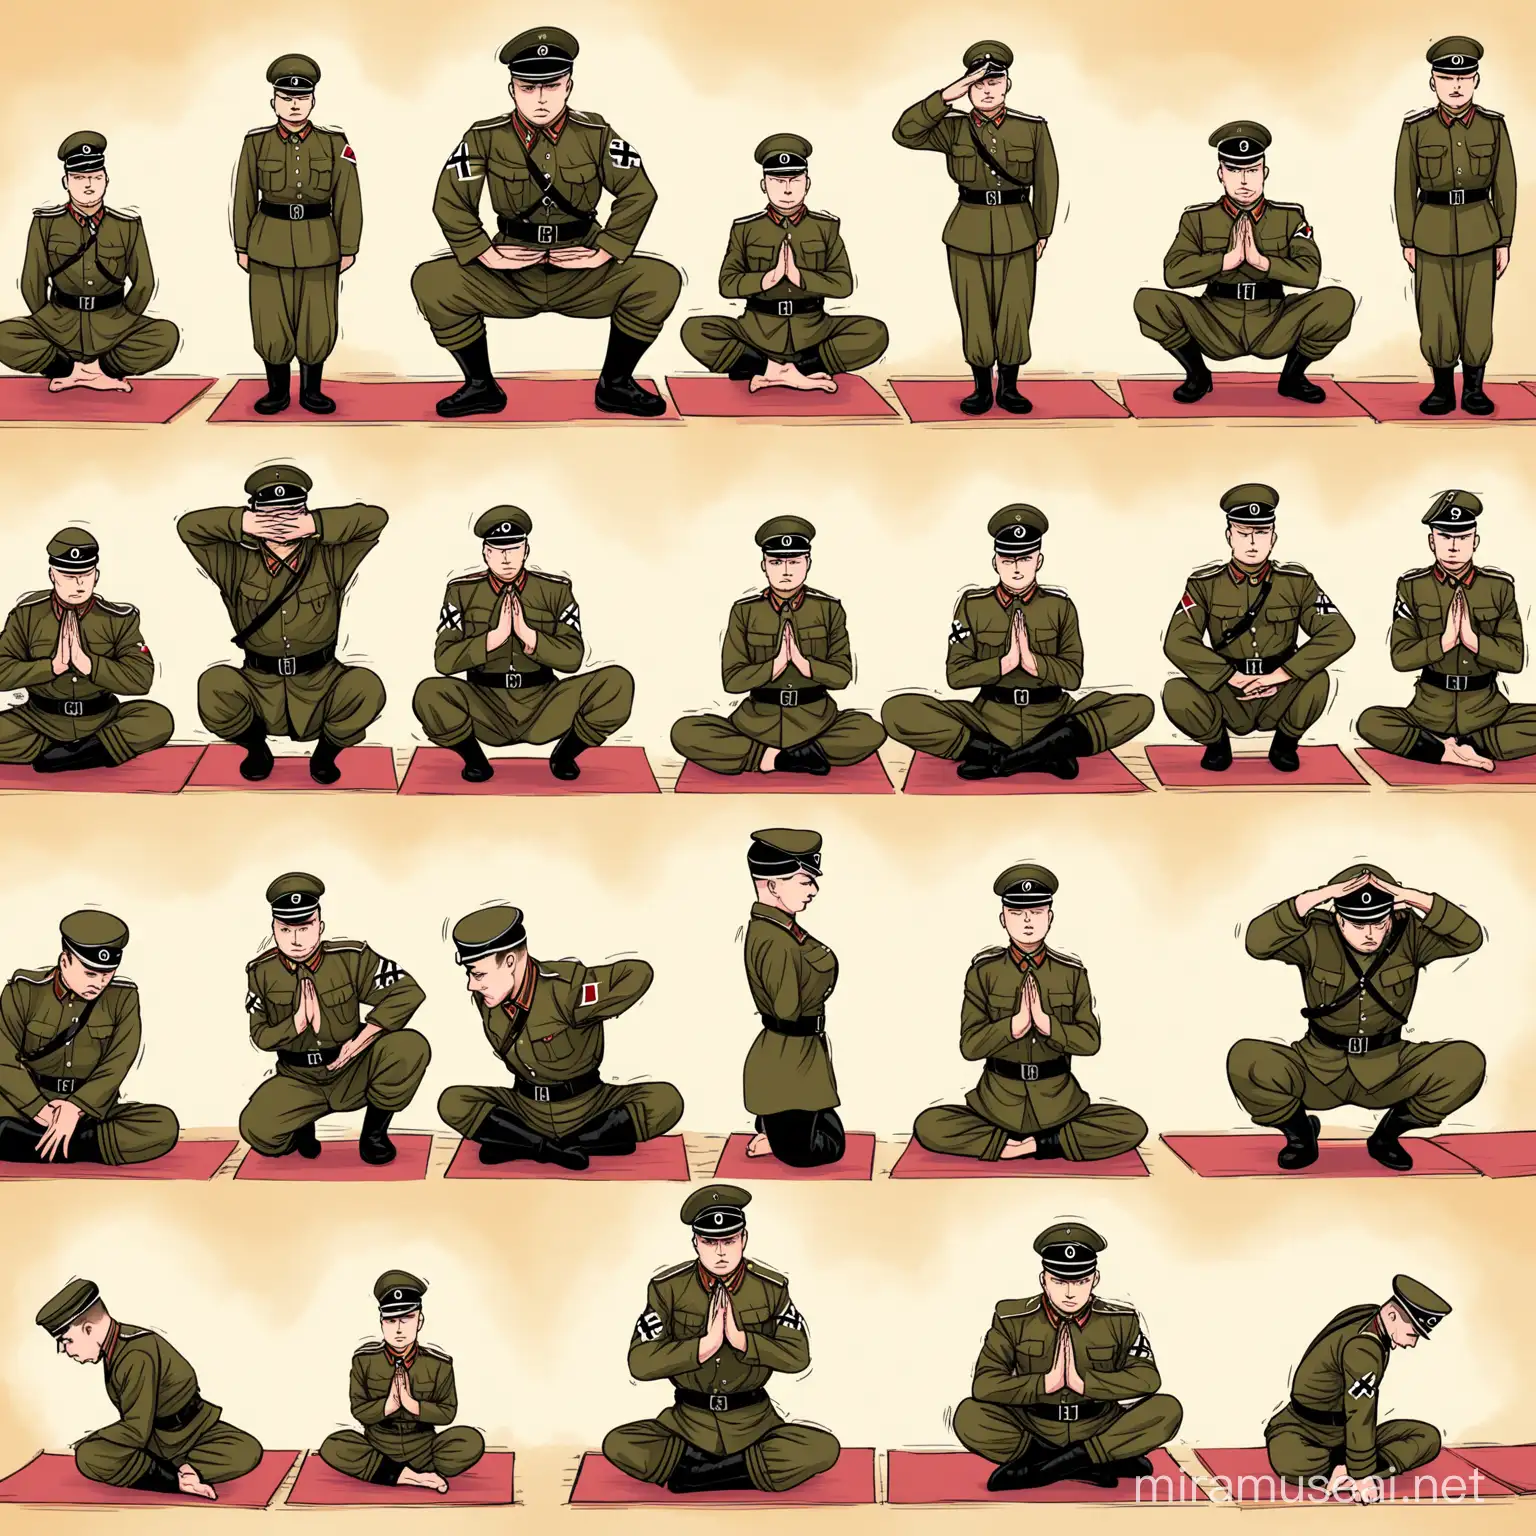 Comic Nazi Soldiers Engage in Yoga and Concentration Exercise